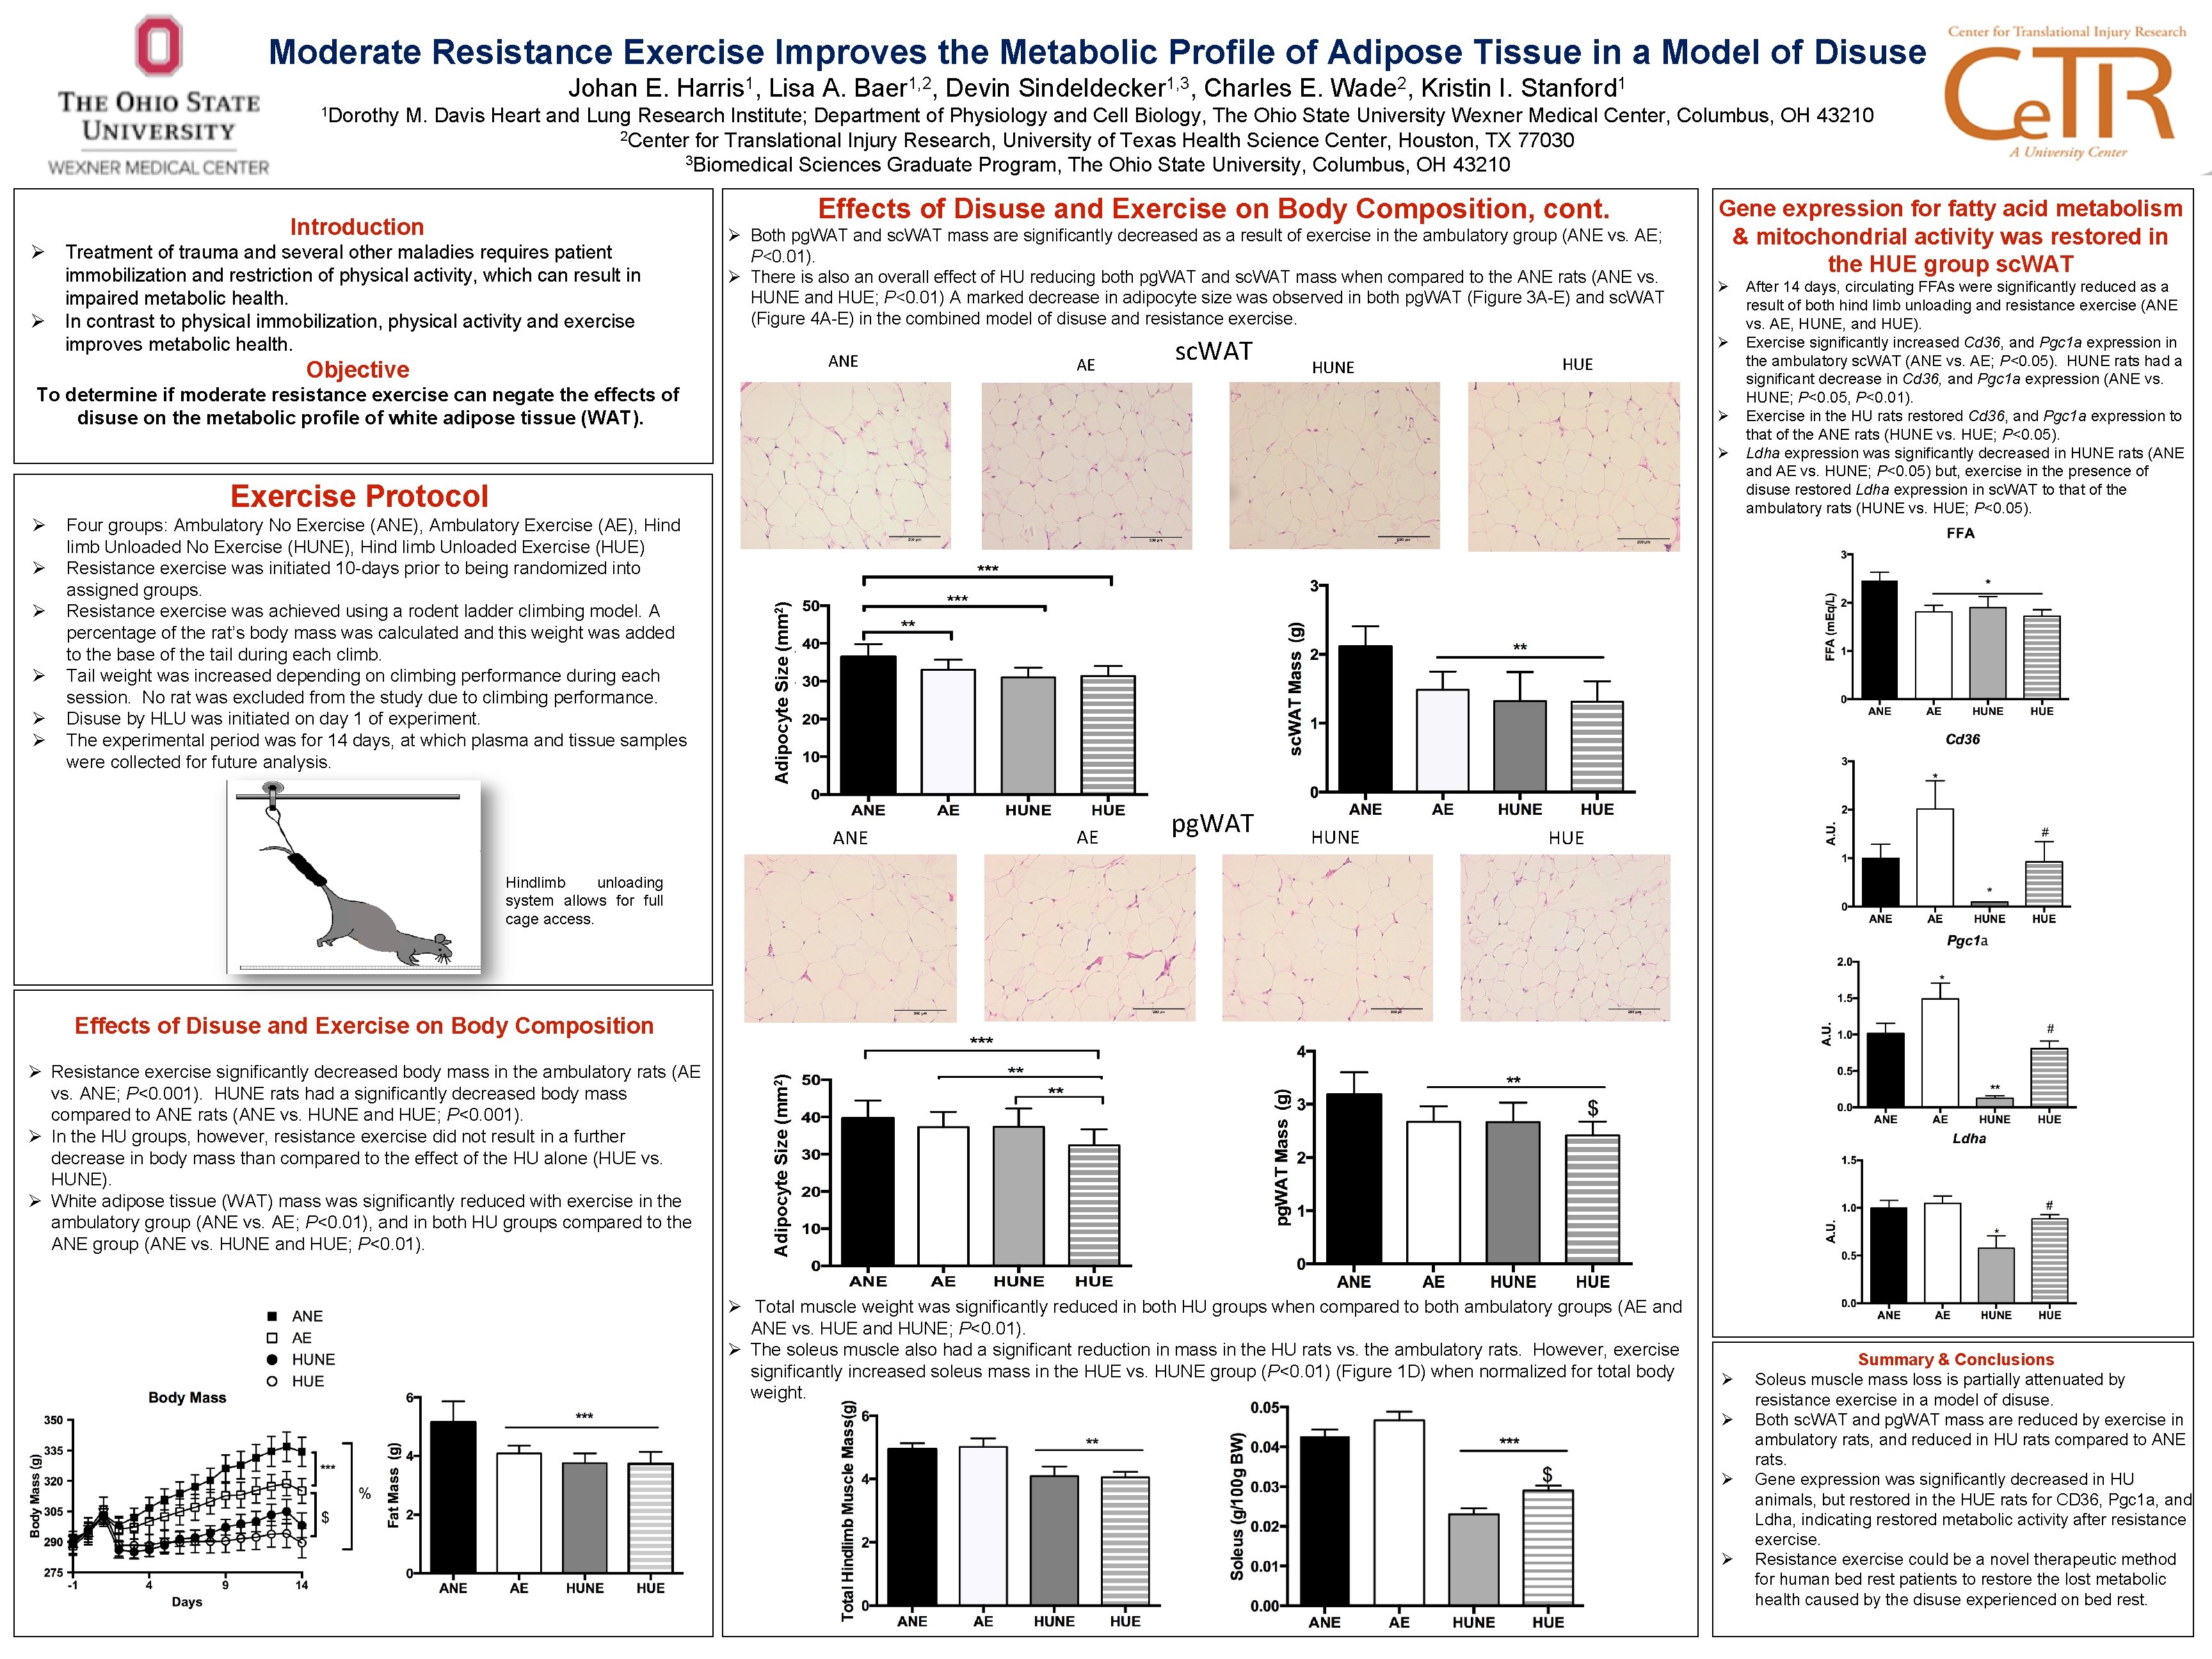 Moderate Resistance Exercise Improves the Metabolic Profile of Adipose Tissue in a Model of